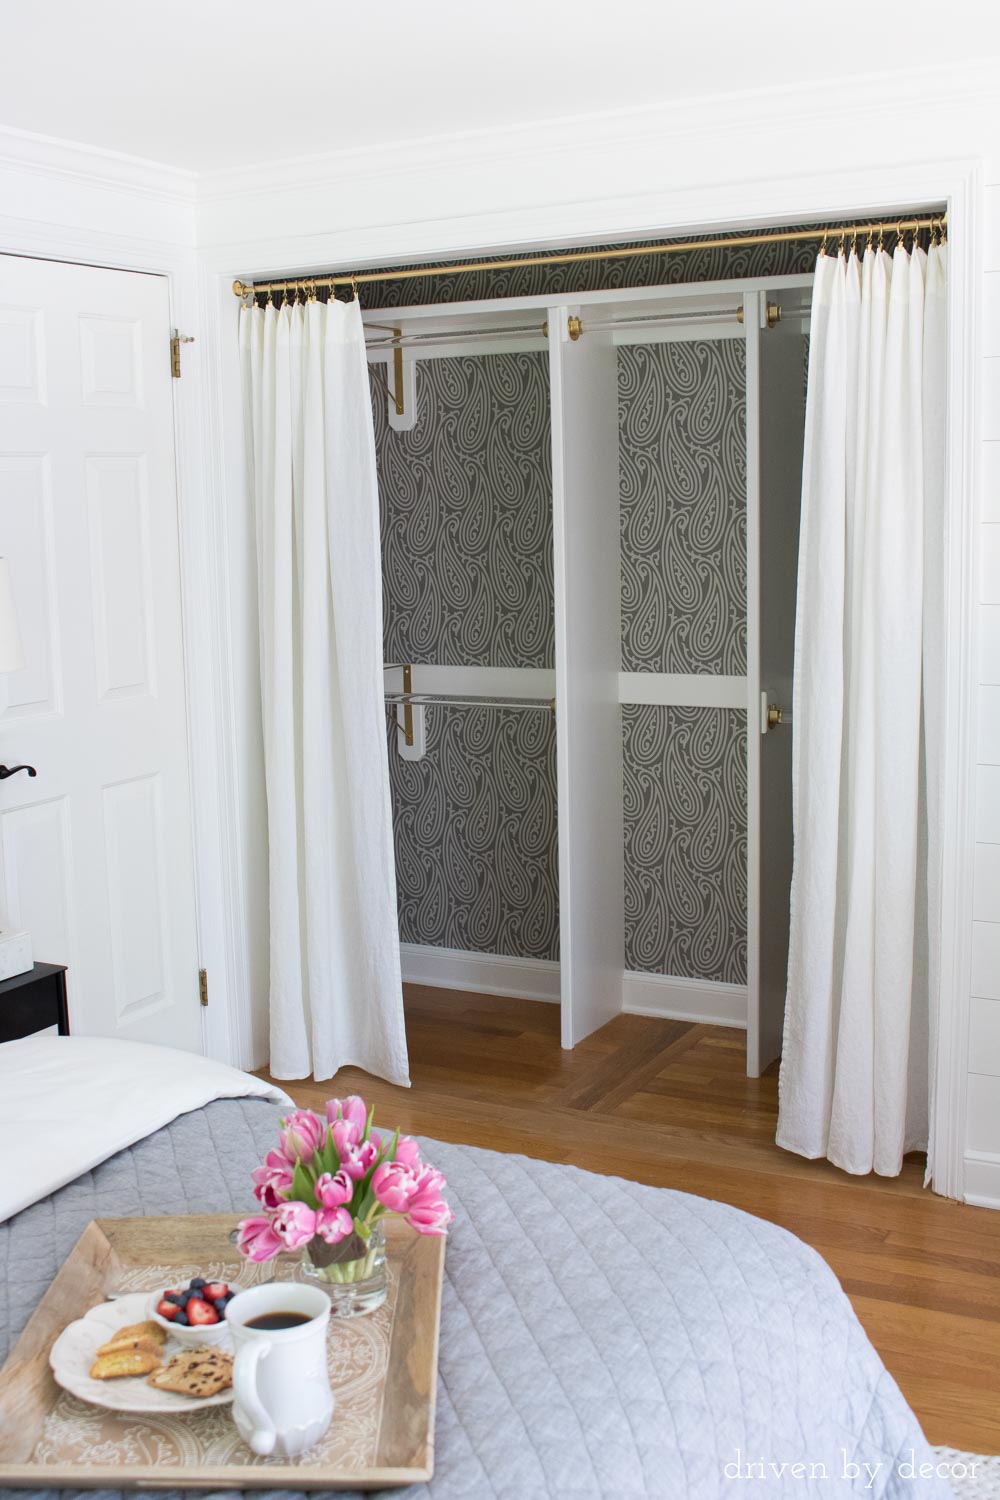 I took of my clunky closet doors and added curtains instead - one of my favorite projects ever!